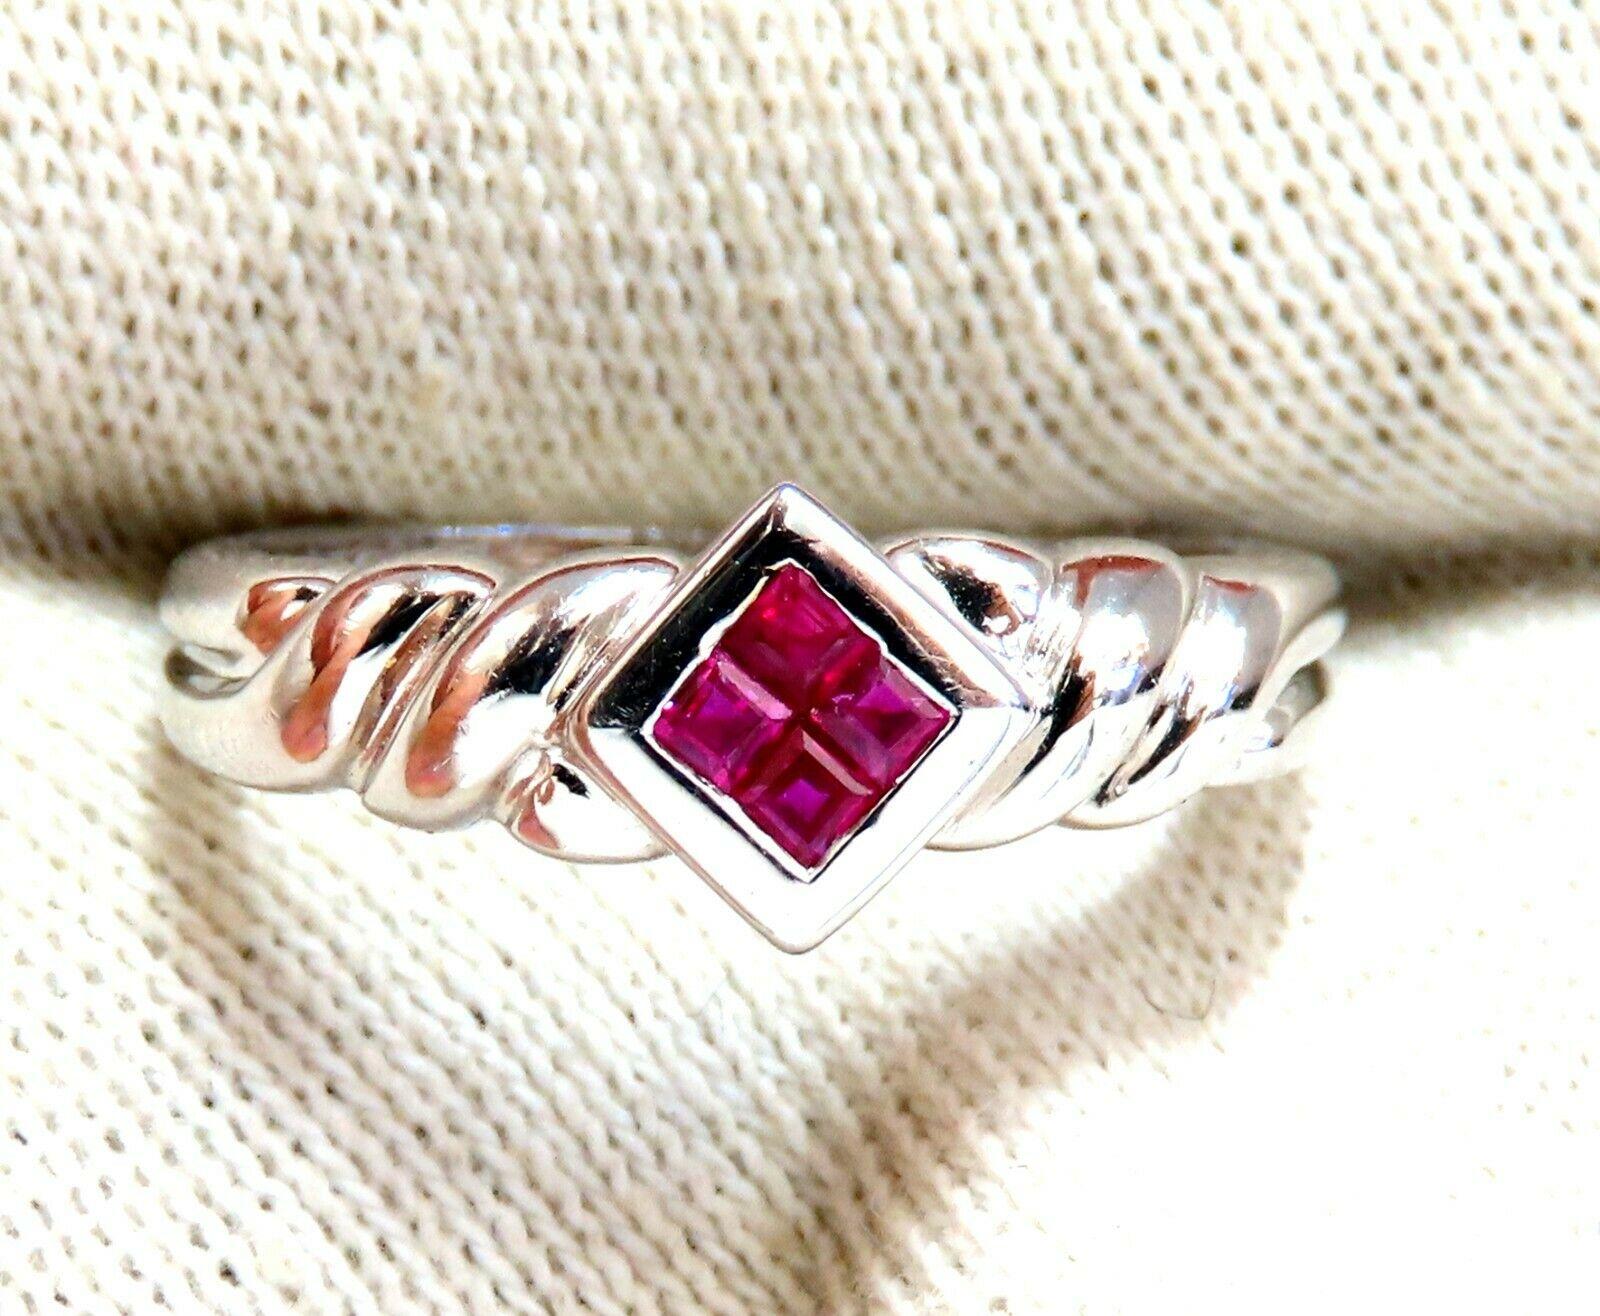 Braid Twist Shoulders & Invisible Set Squared

.40ct. Natural Rubies Ring

Full cut and brilliant

Clean clarity and transparent

14ky white gold

Durable for the everyday wear

2.9 grams

Current size: 7 & we may resize,

Please inquire